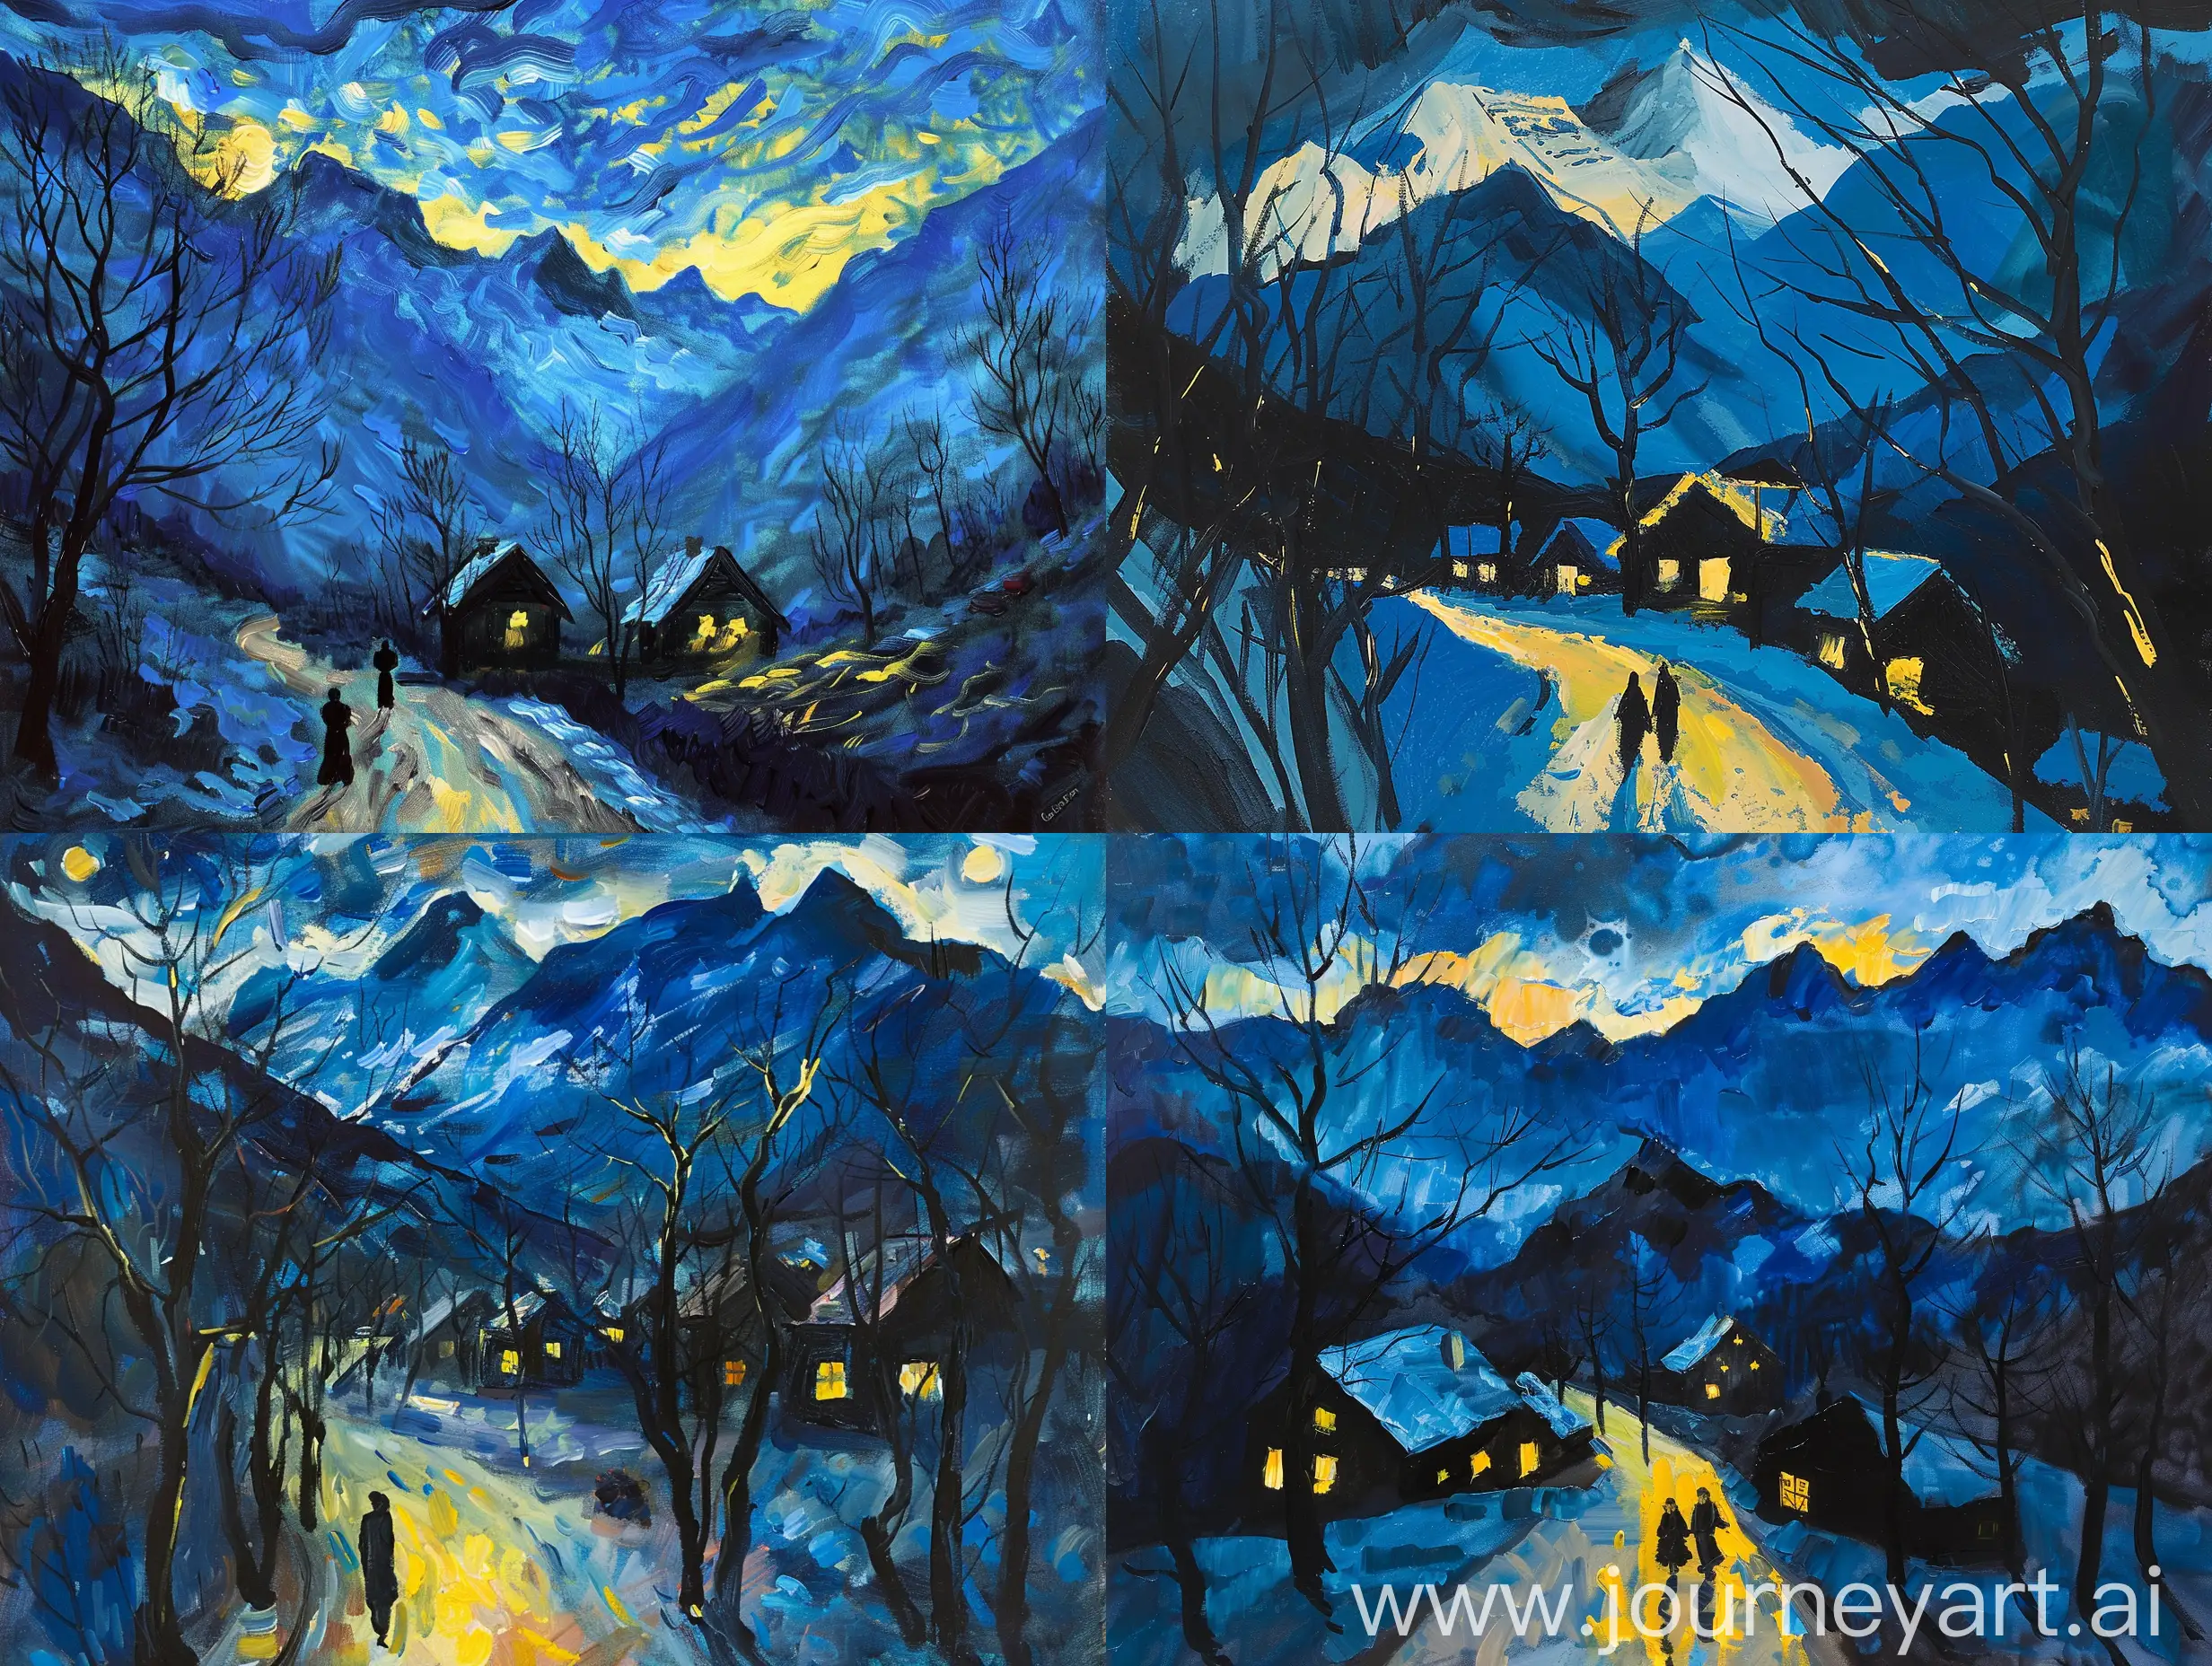 Nocturnal-Journey-Moonlit-Path-in-PostImpressionist-Style